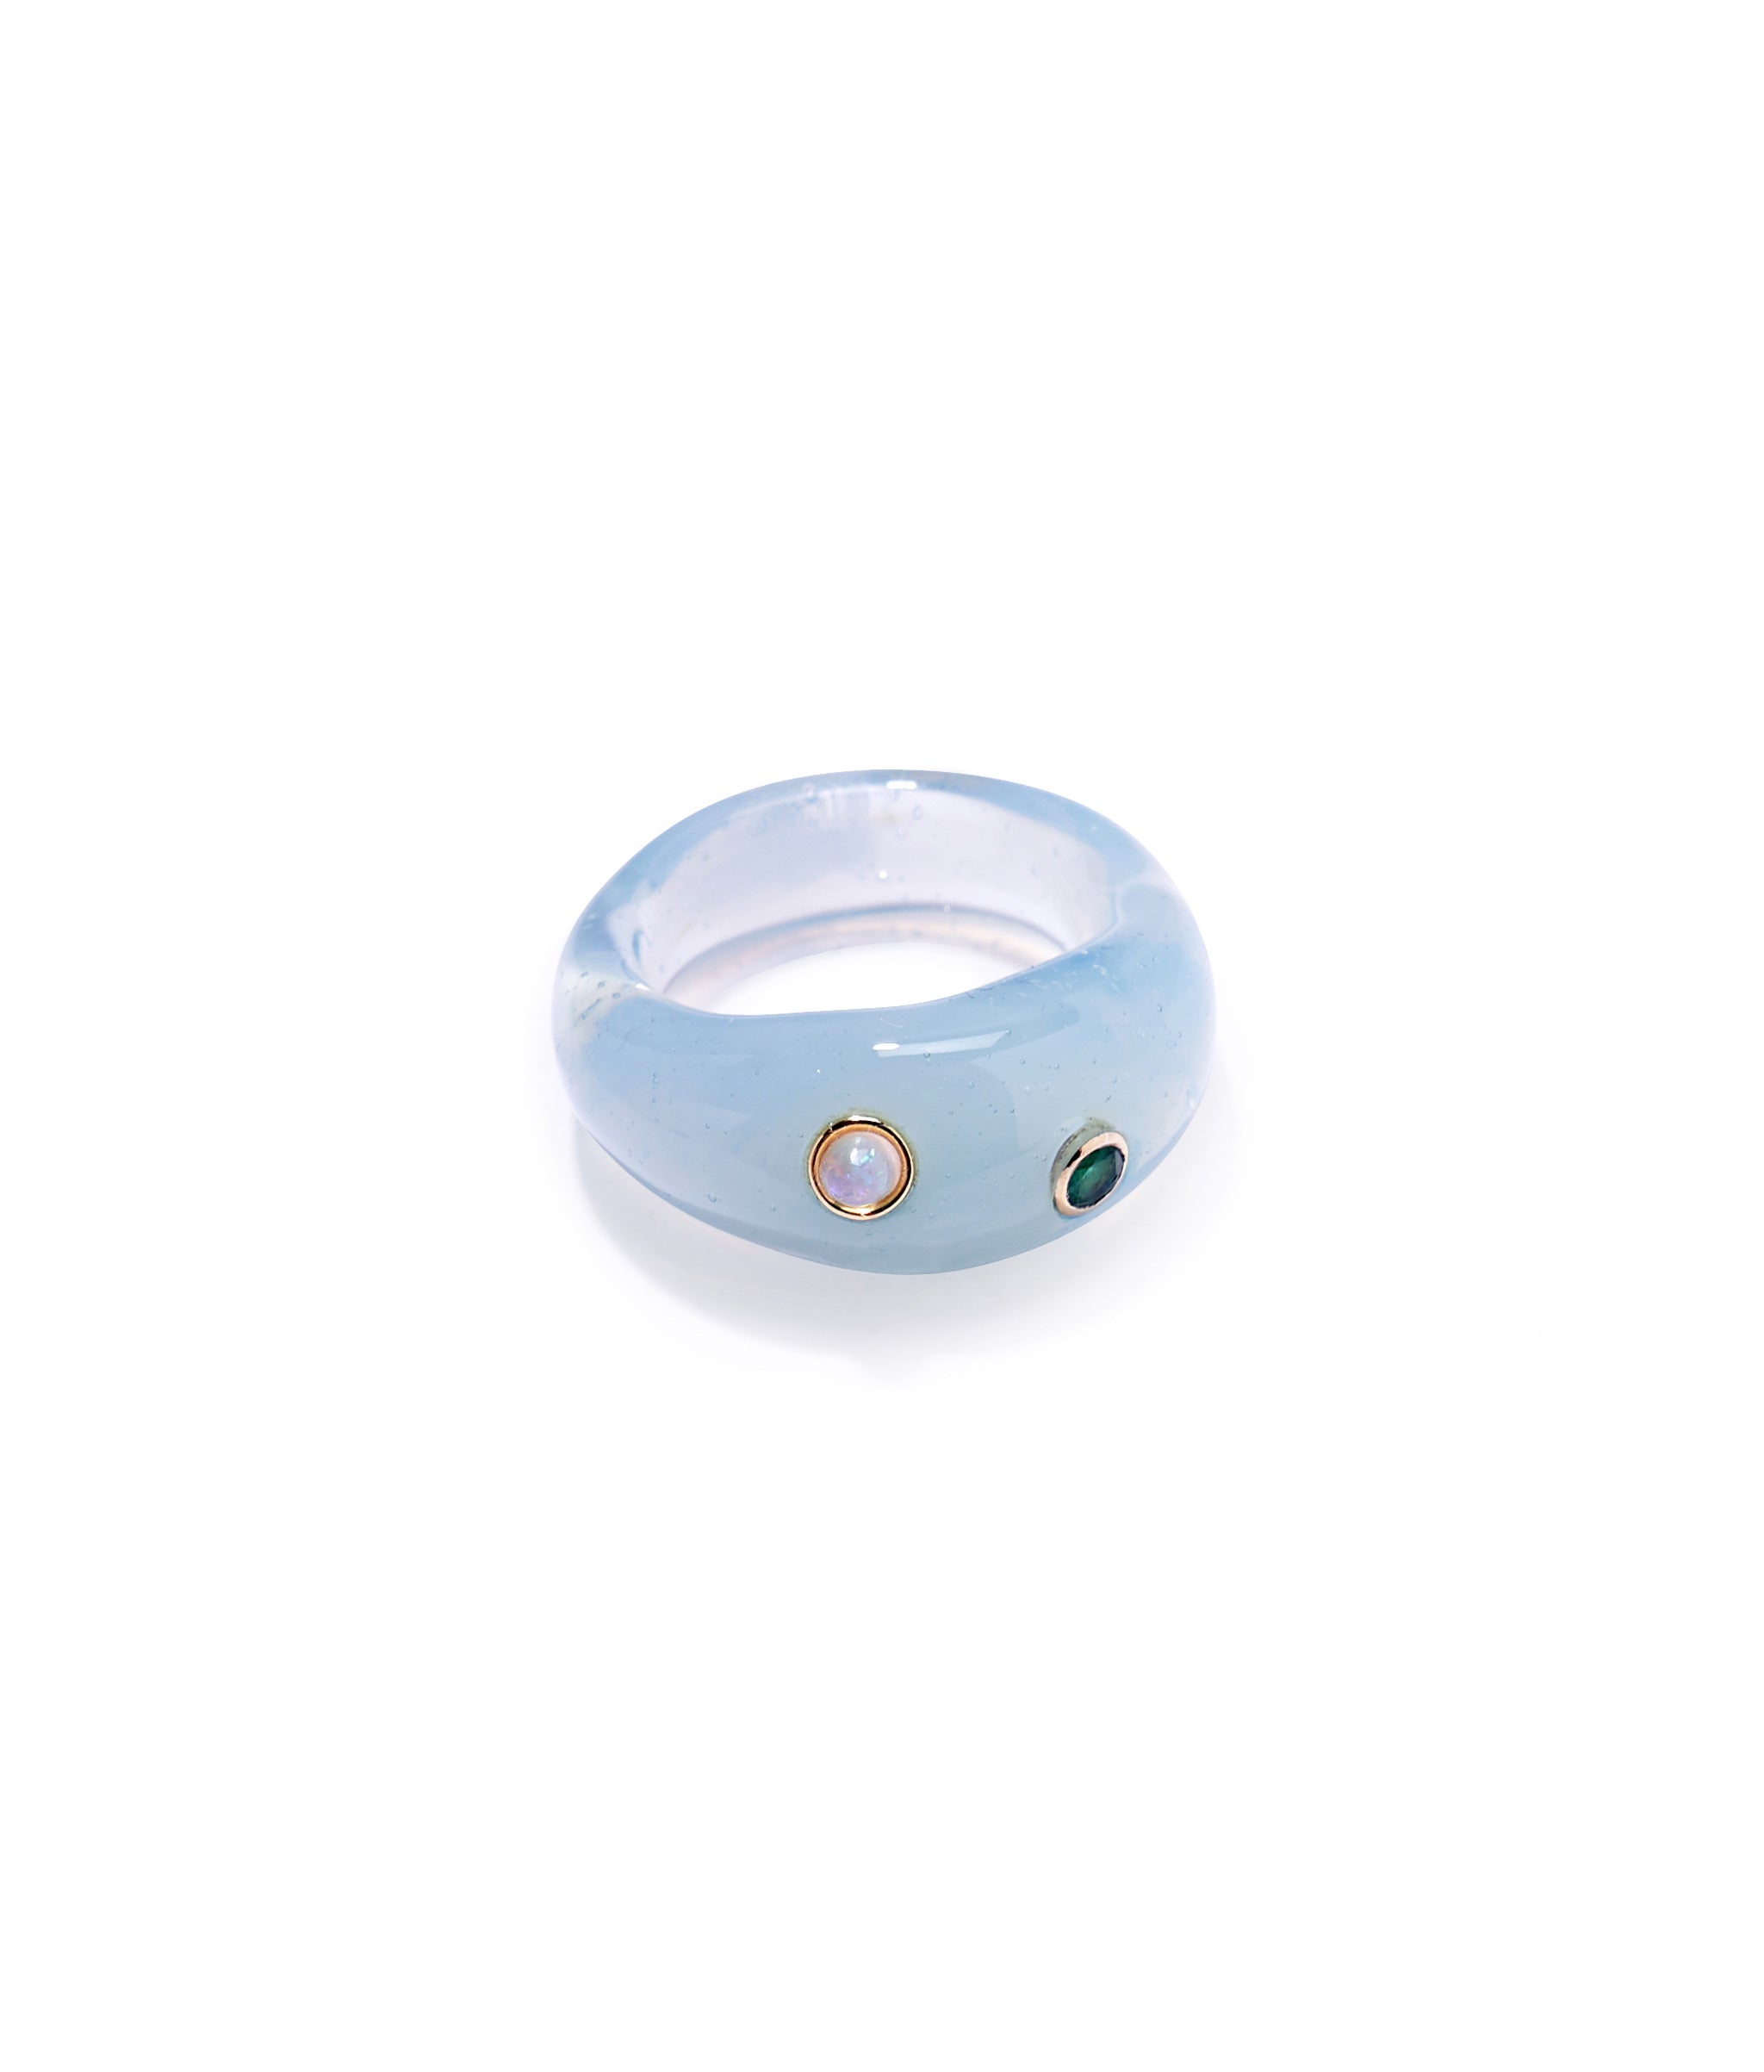 Monument Ring in Sky. Light blue domed glass cocktail ring inset with emerald and opal stones.